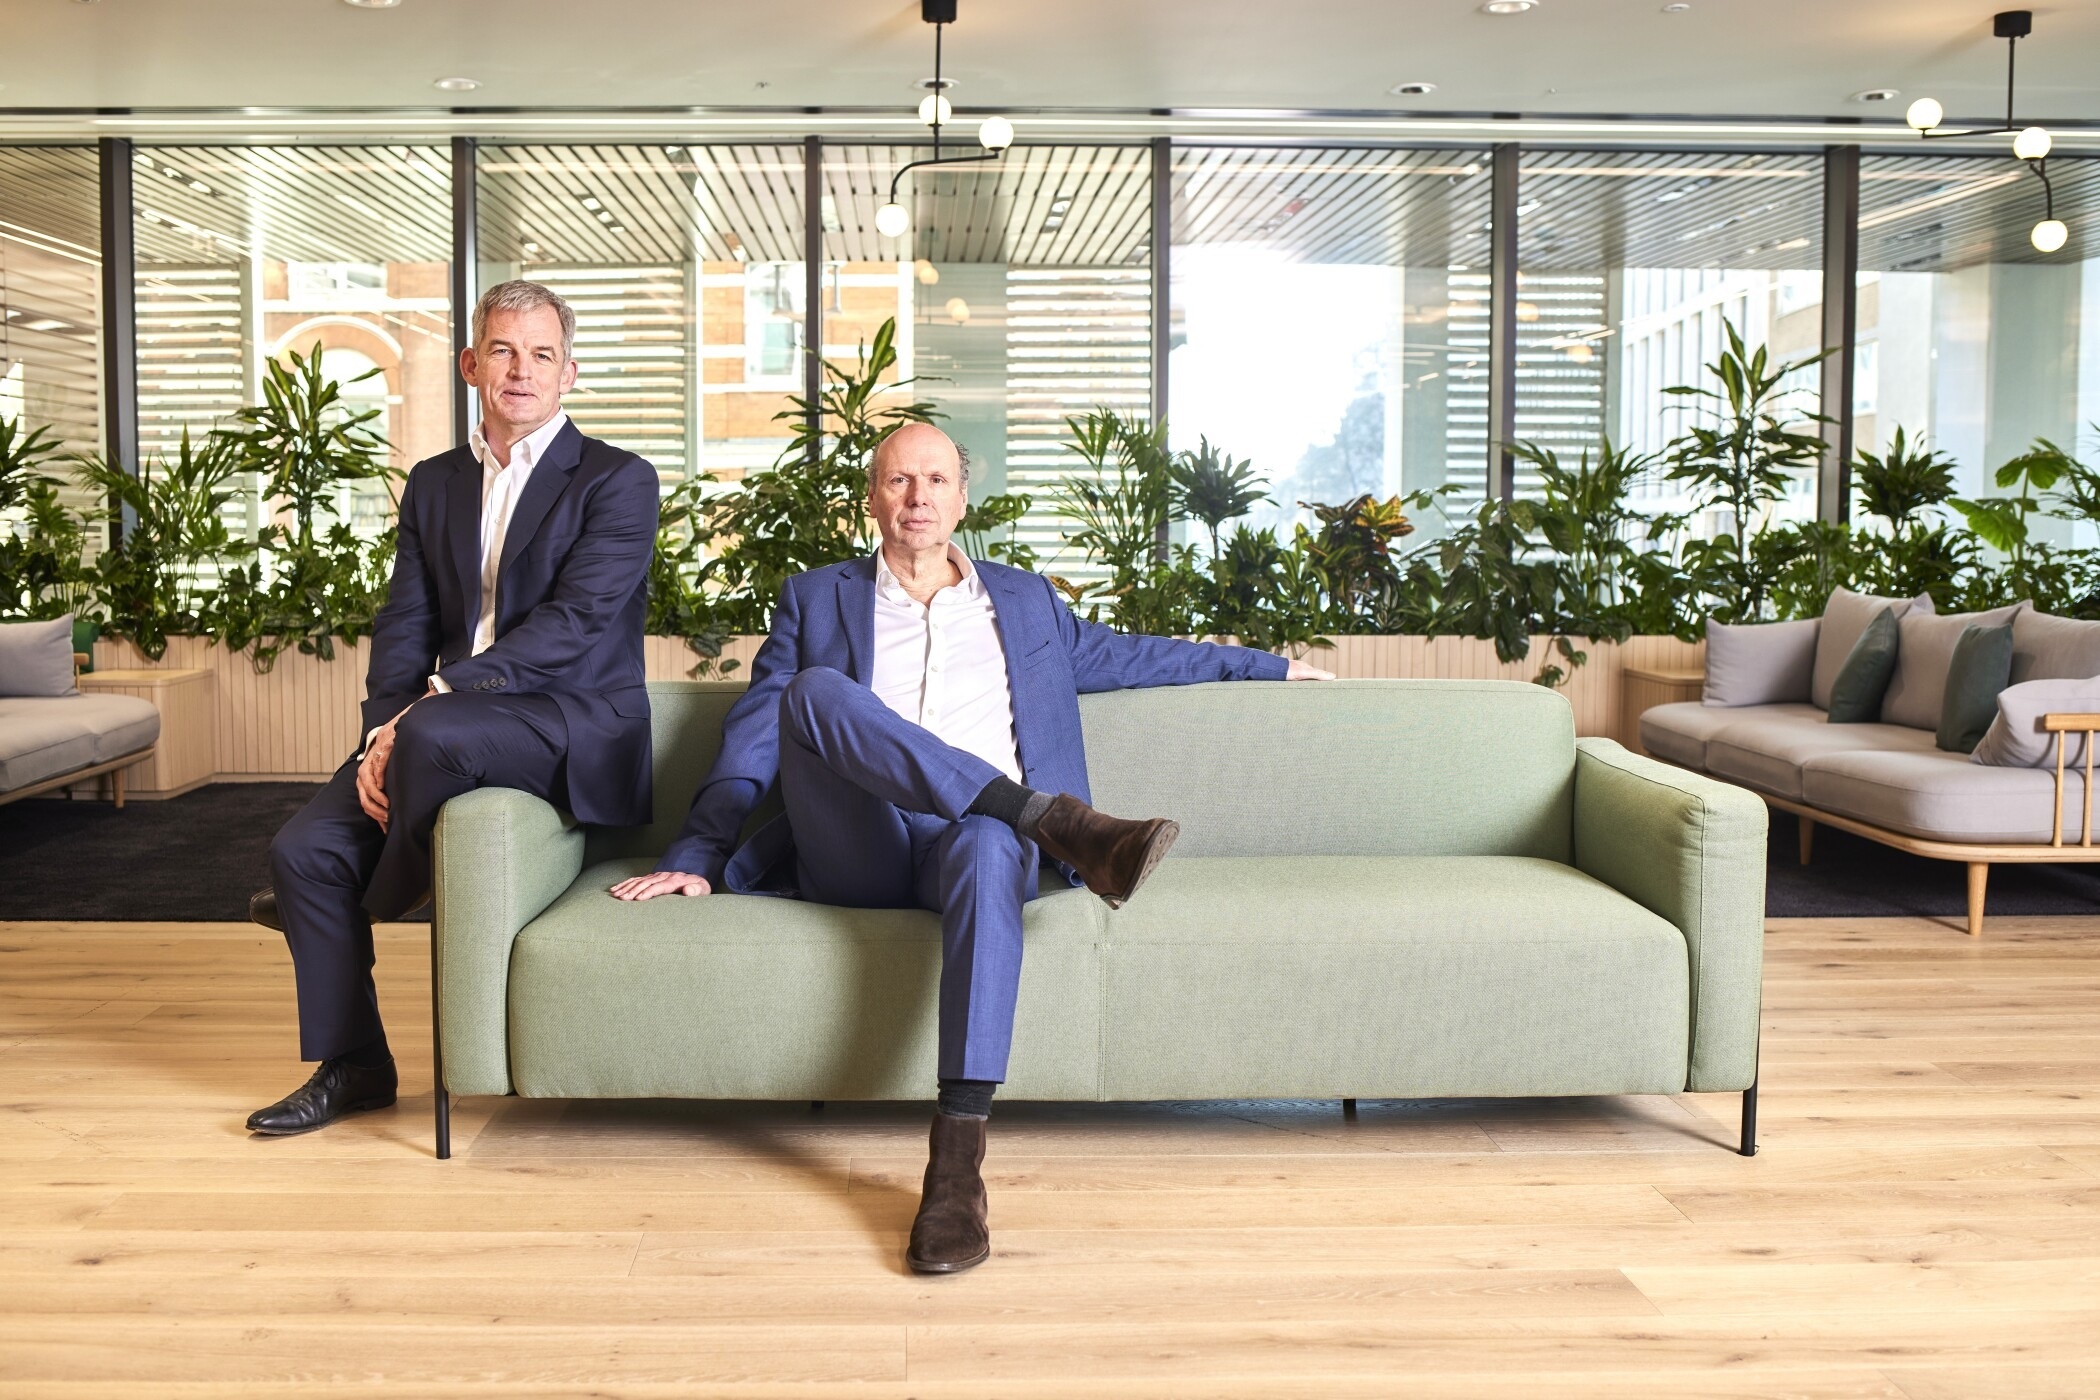 Gerald Eve executive Simon Rees, left, will be a managing partner at Newmark, and Simon Prichard, right, will serve as a senior partner. (Newmark)